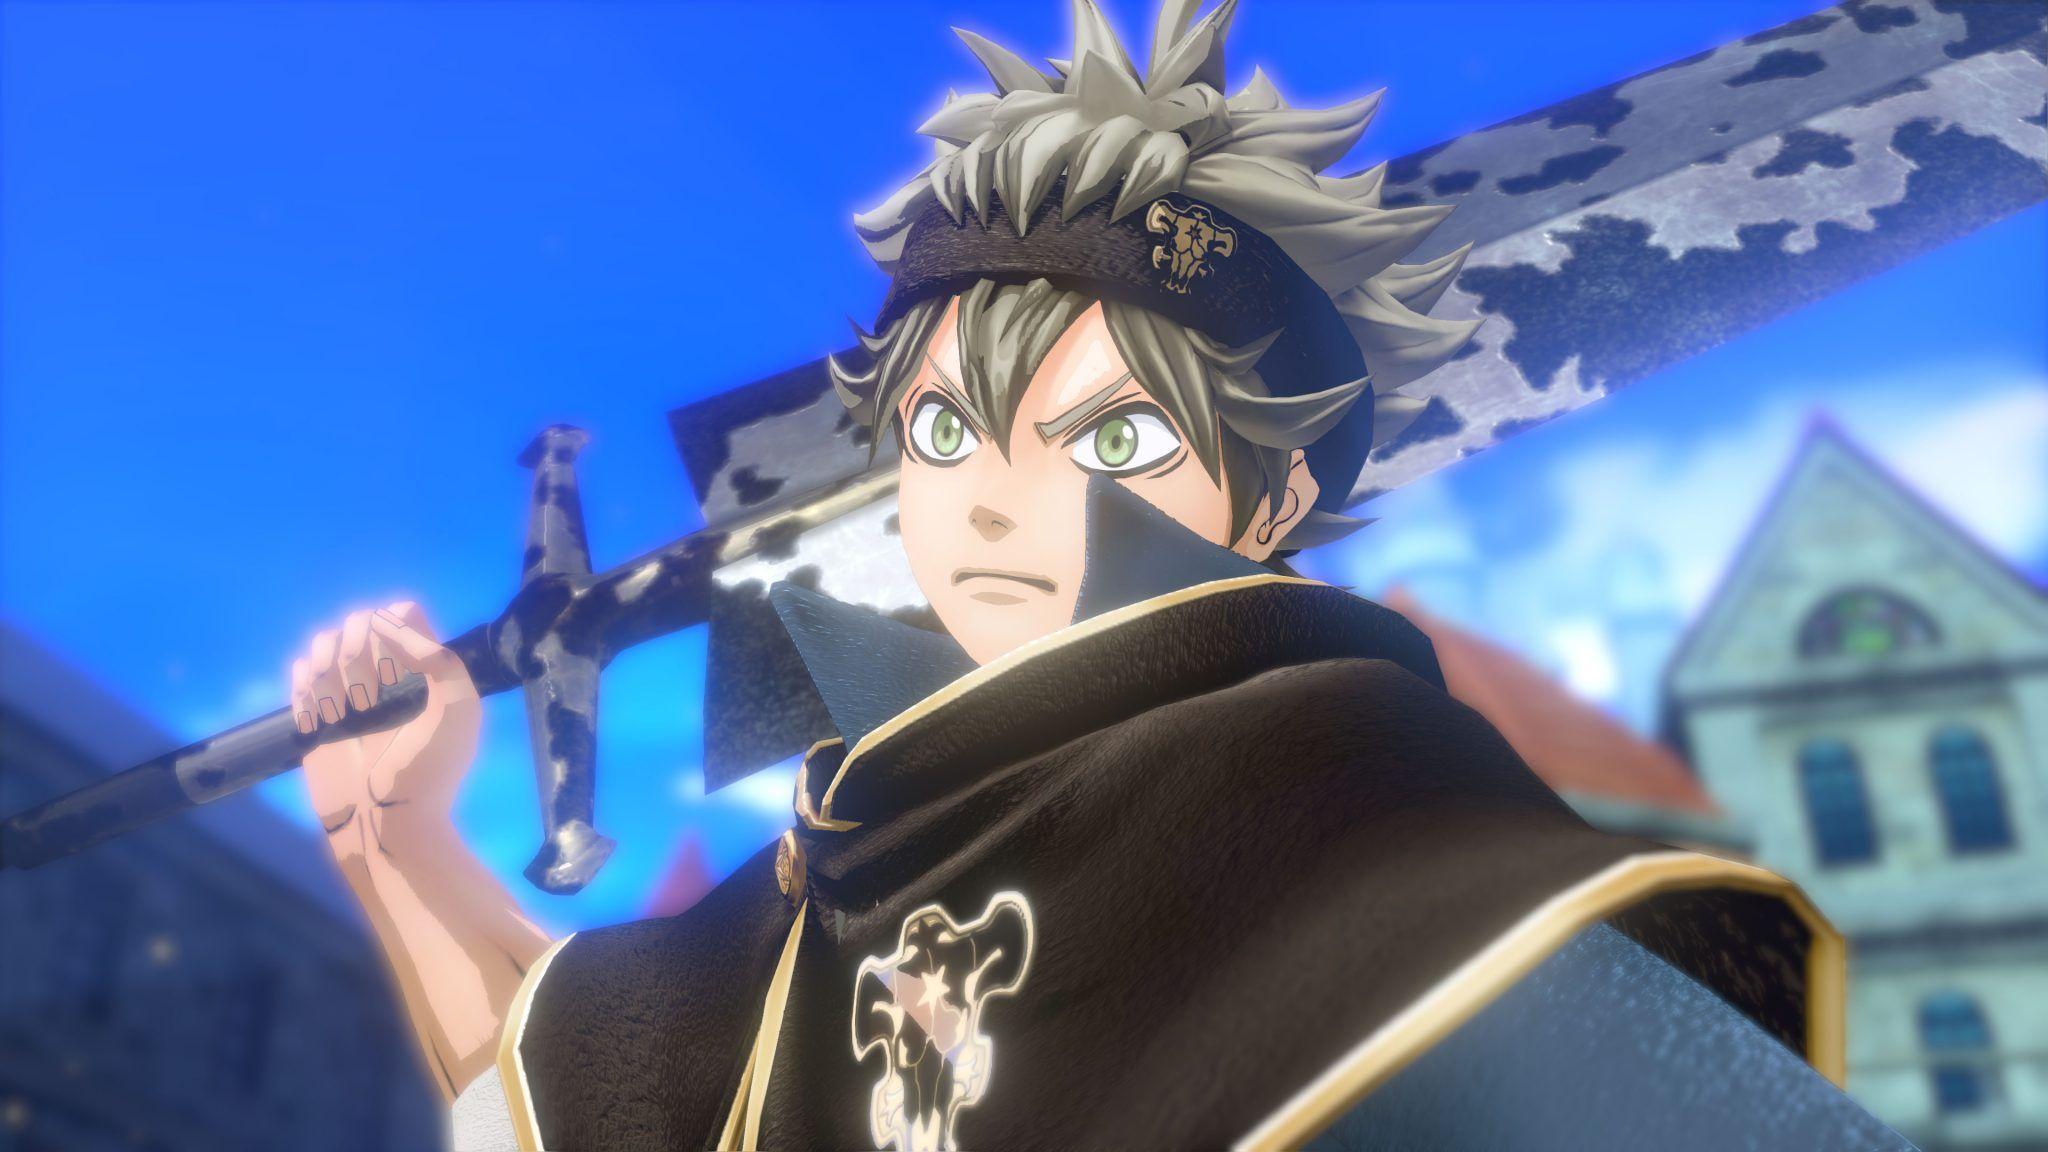 Black Clover: Quartet Knights Out On September 14th For PS4 And PC